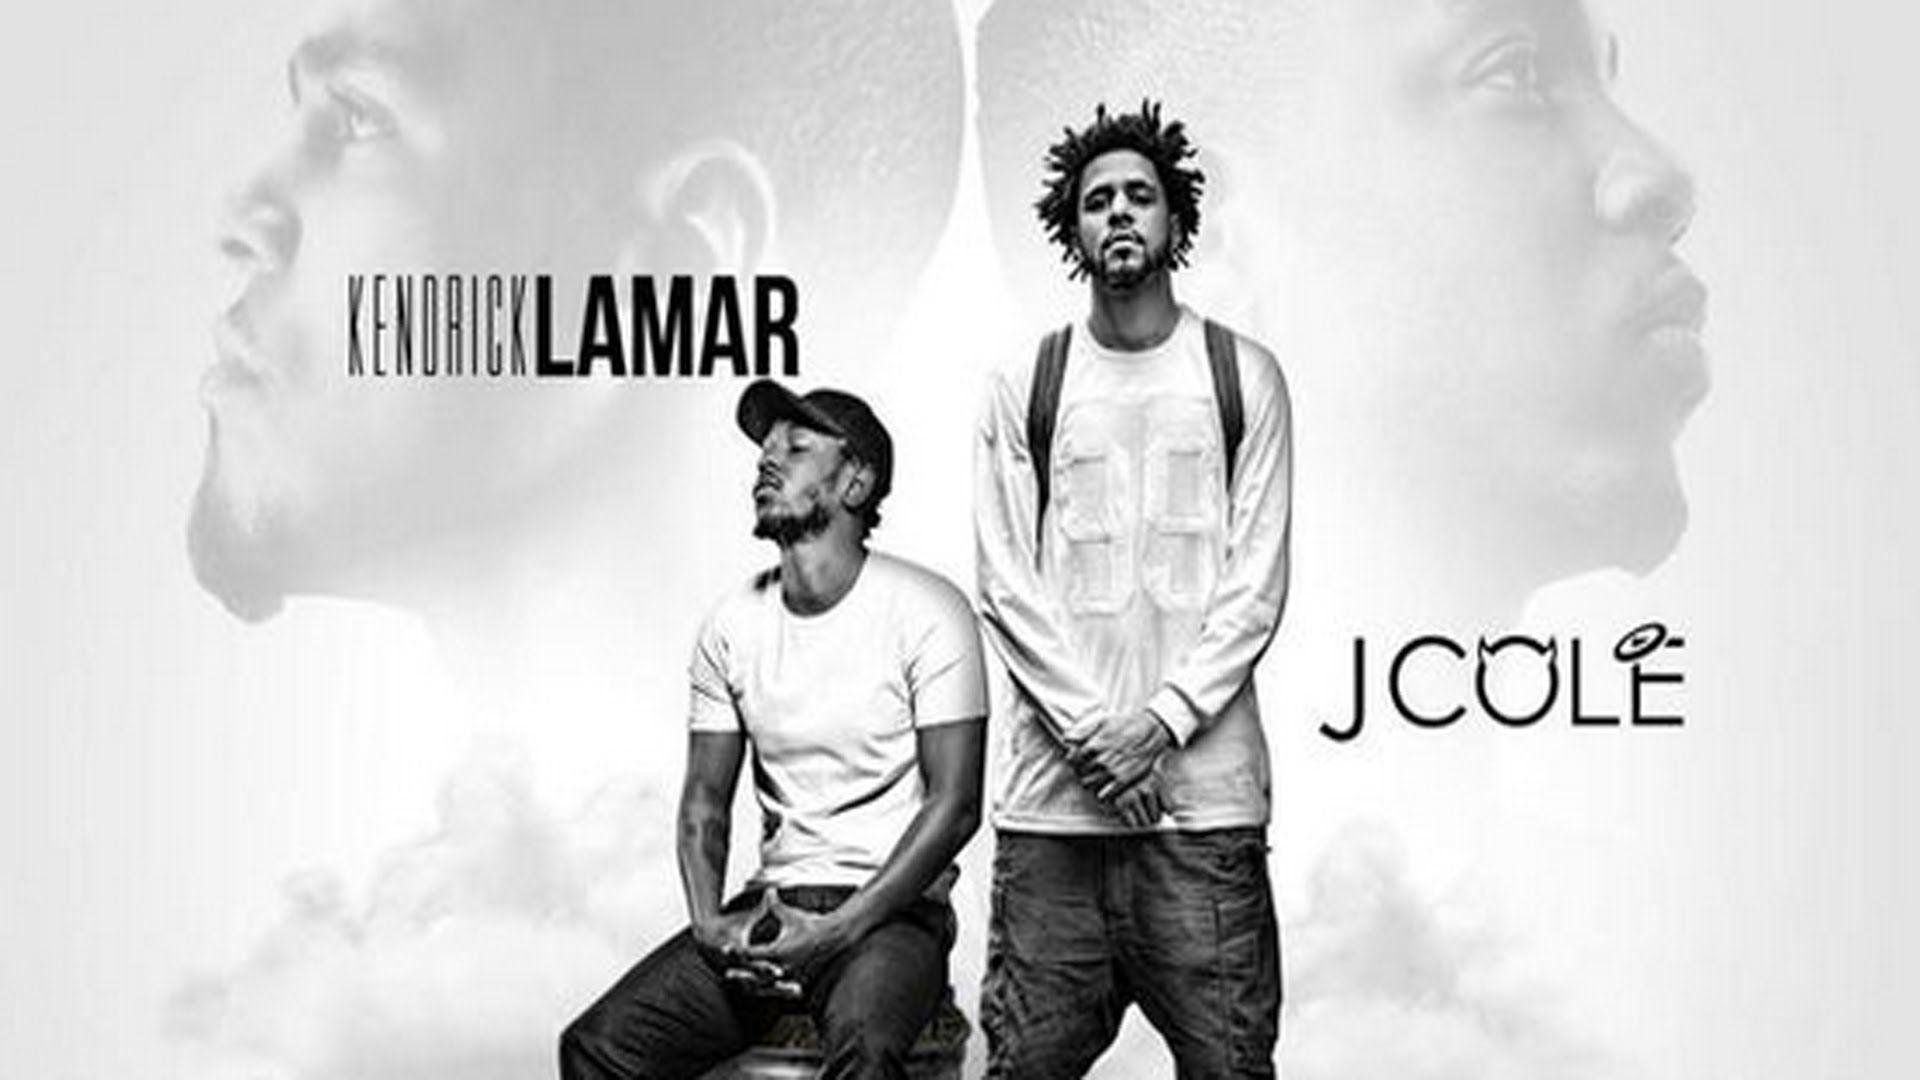 J cole and kendrick lamar wallpapers